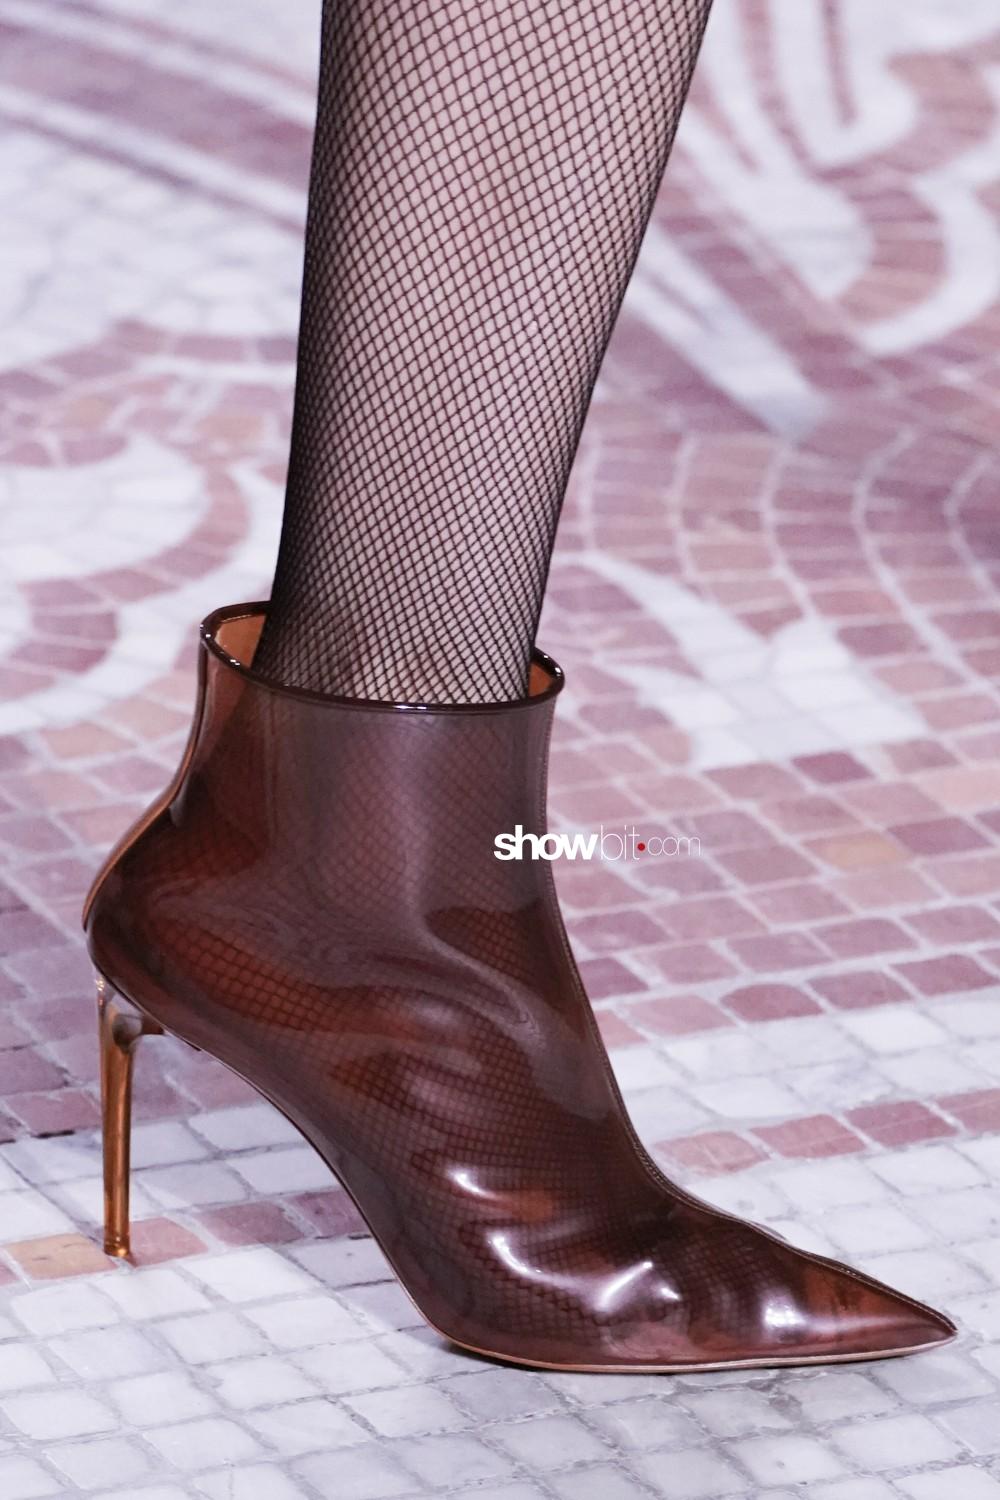 Givenchy close-up Haute Couture Fall Winter 2019 Paris Accessories